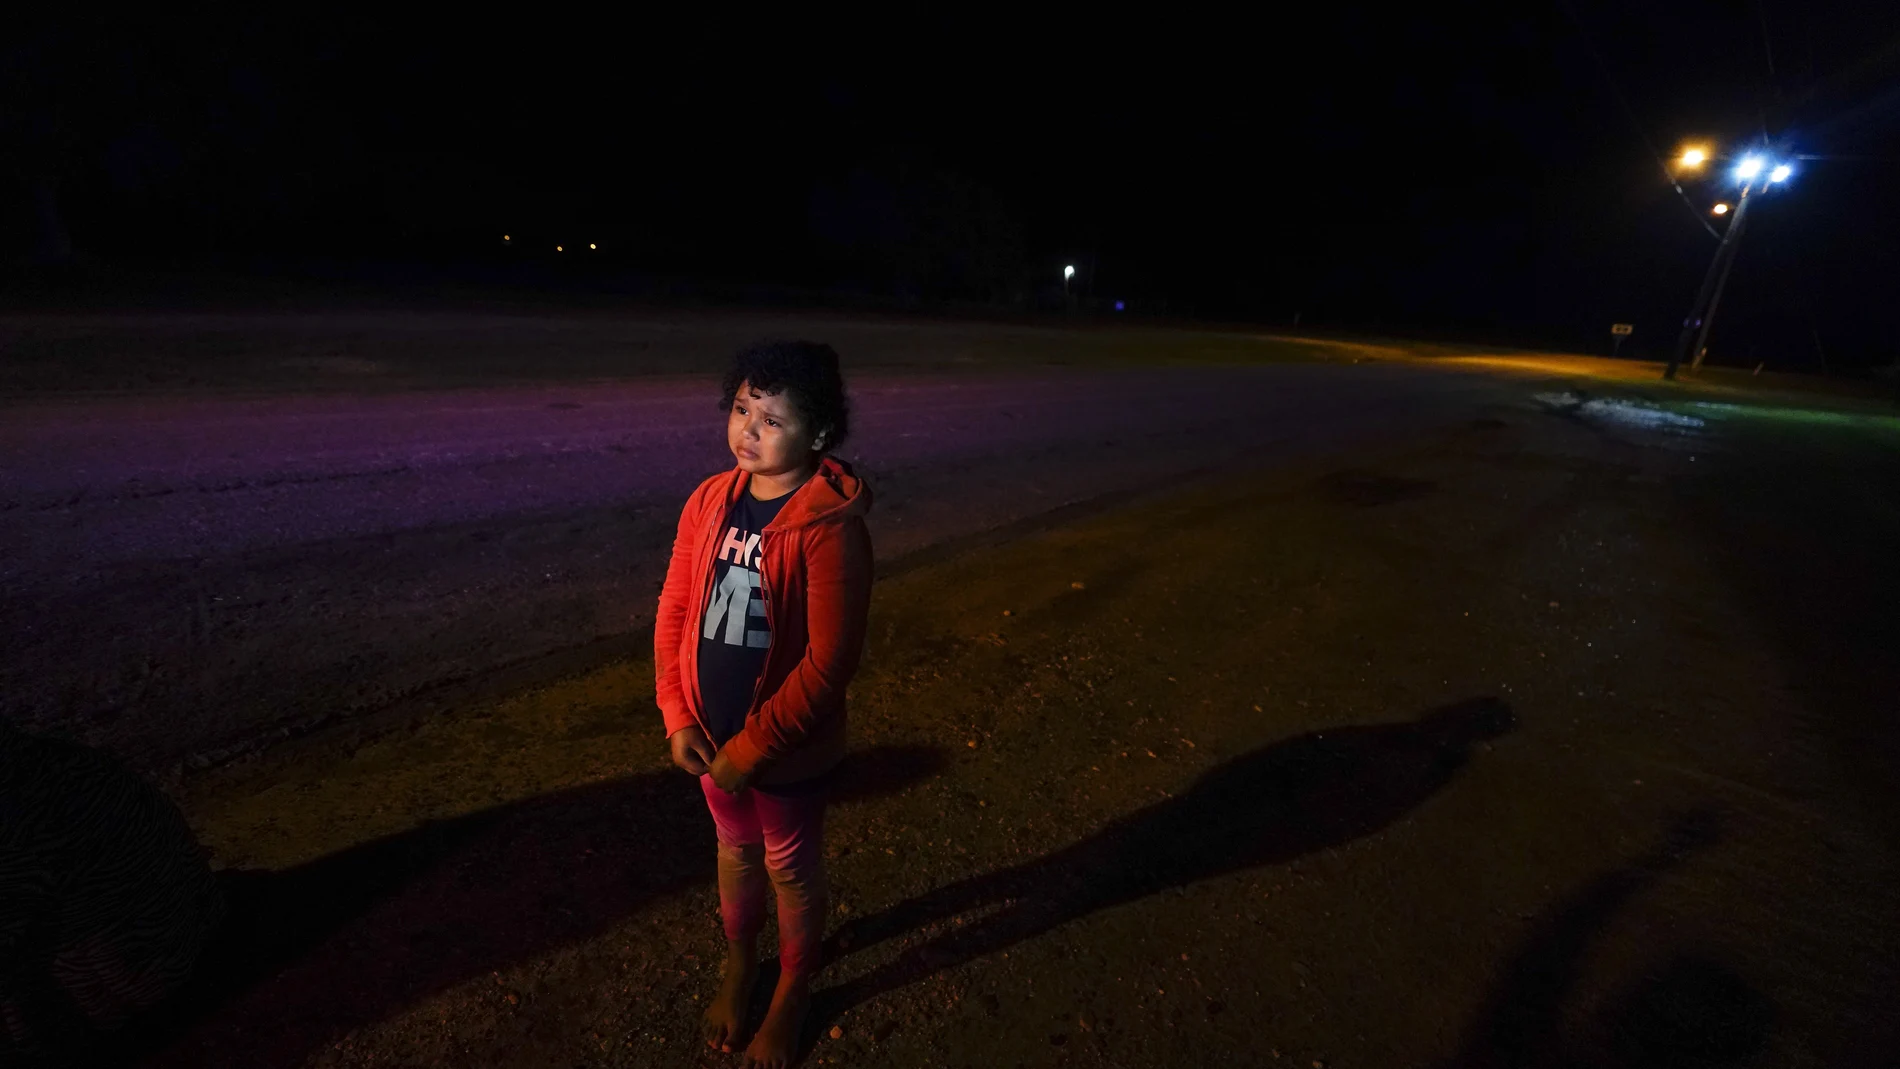 FILE - In this May 13, 2021, file photo, Emely, 8, of Honduras, stands alone after turning herself in upon crossing the U.S.-Mexico border in La Joya, Texas. Her mother, Glenda Valdez was at her home in Austin, watching a Univision newscast one afternoon in May, when she saw this picture of Emely in a red hoodie. She knew at once that it was her daughter. Desperate, she immediately began making calls to U.S. authorities, the network and refugee agencies. (AP Photo/Gregory Bull, File)